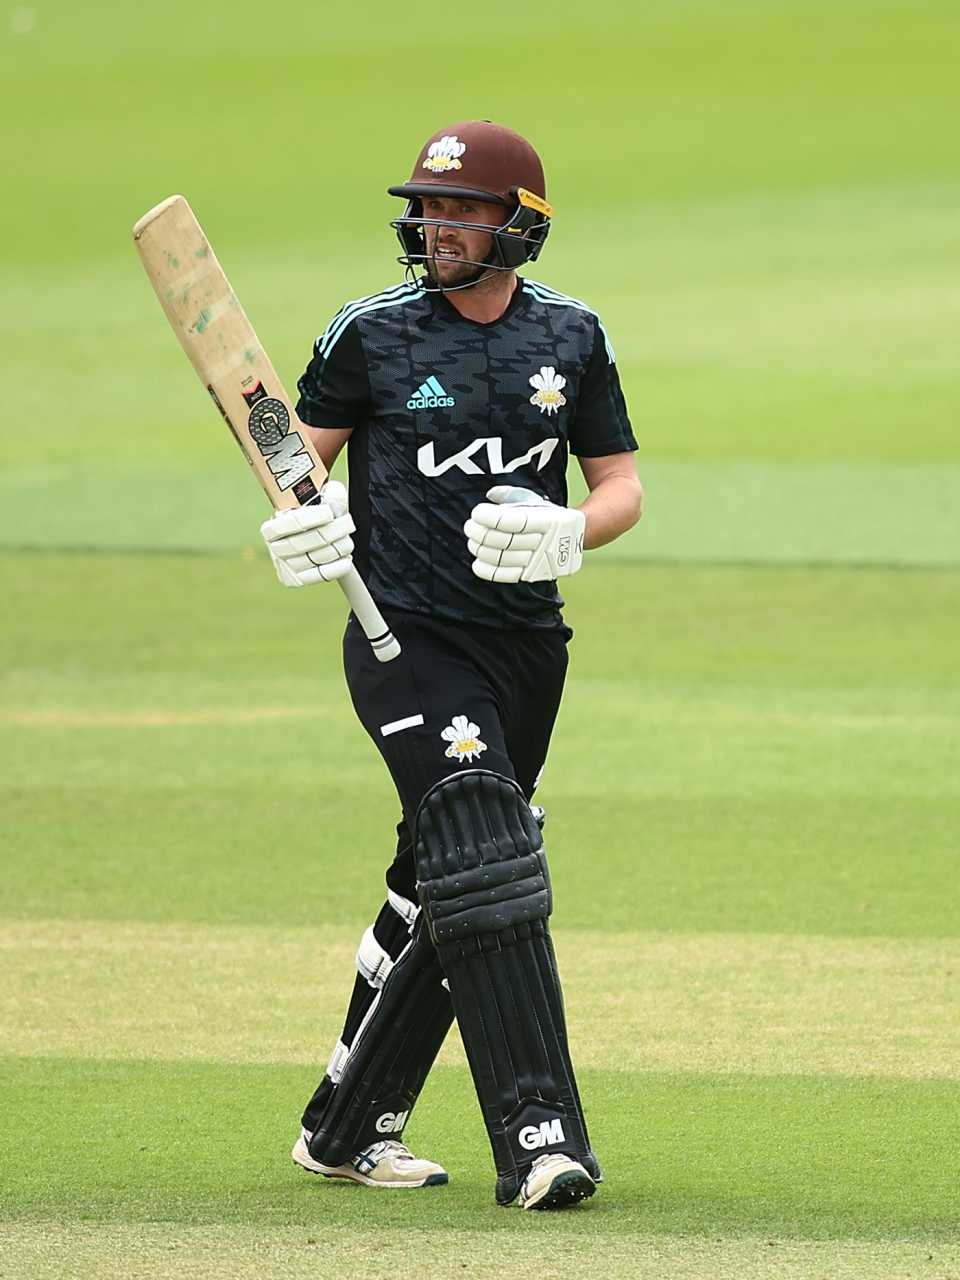 Cameron Steel made a sprightly half-century, Surrey vs Gloucestershire, Royal London Cup, Kia Oval, August 19, 2022